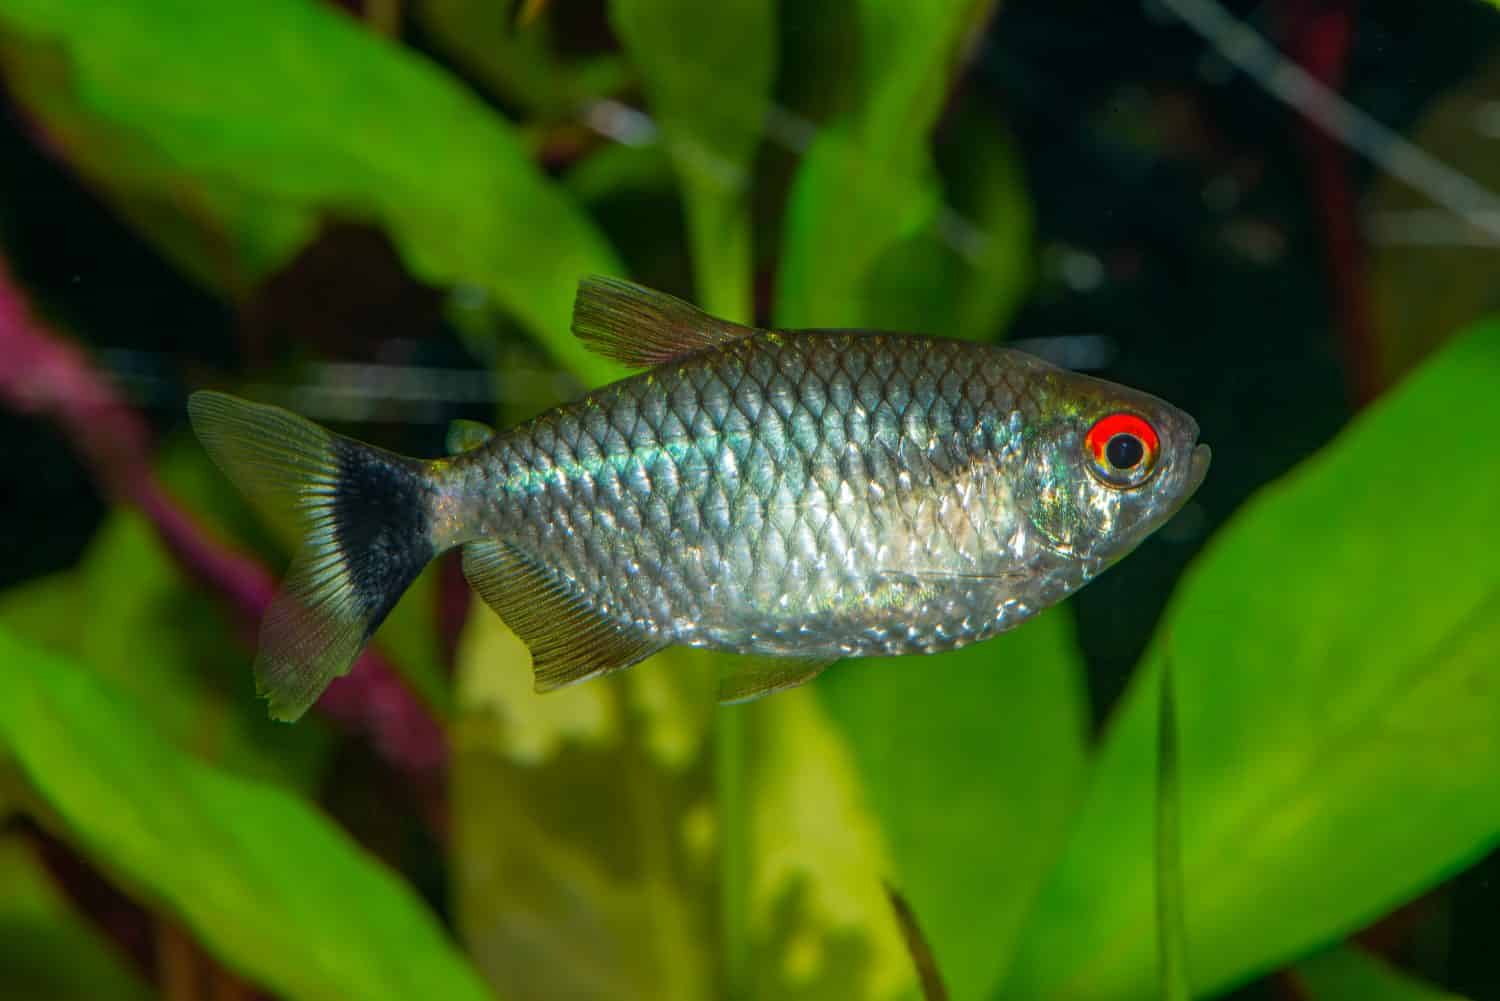 Aquarium fish. The redeye tetra (Moenkhausia sanctaefilomenae), is a species of tetra from the São Francisco, upper Paraná, Paraguay and Uruguay river basins in eastern and central South America.